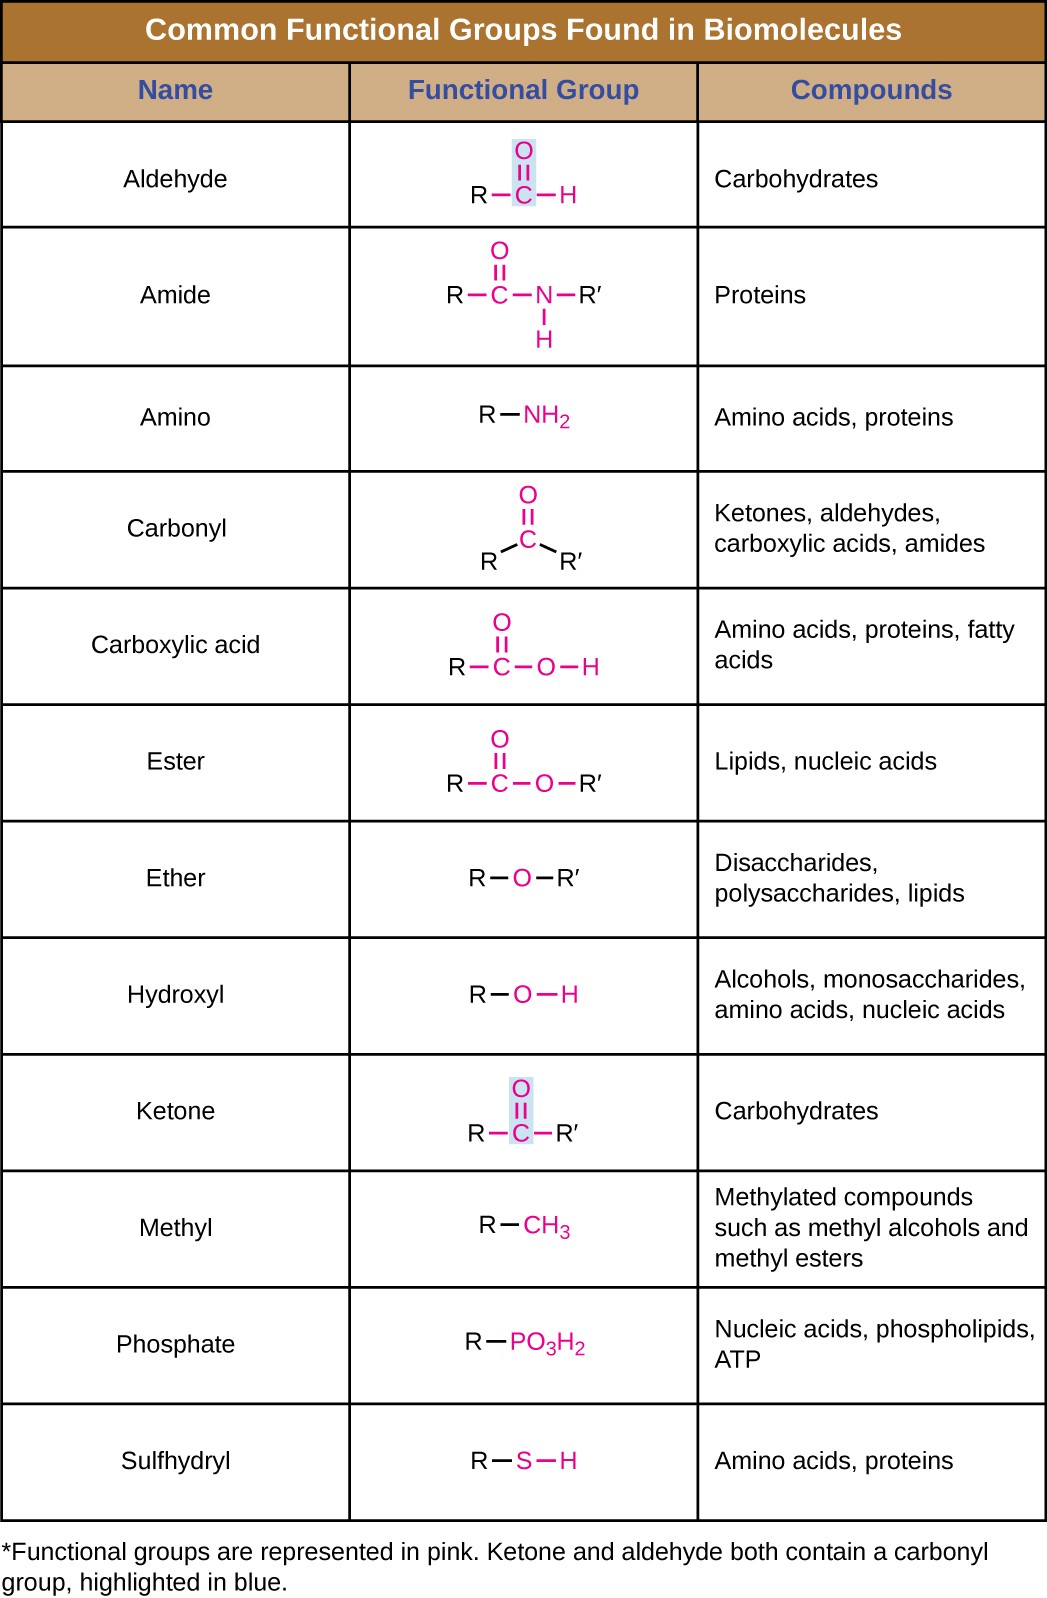 table showing common functional groups found in biomolecules